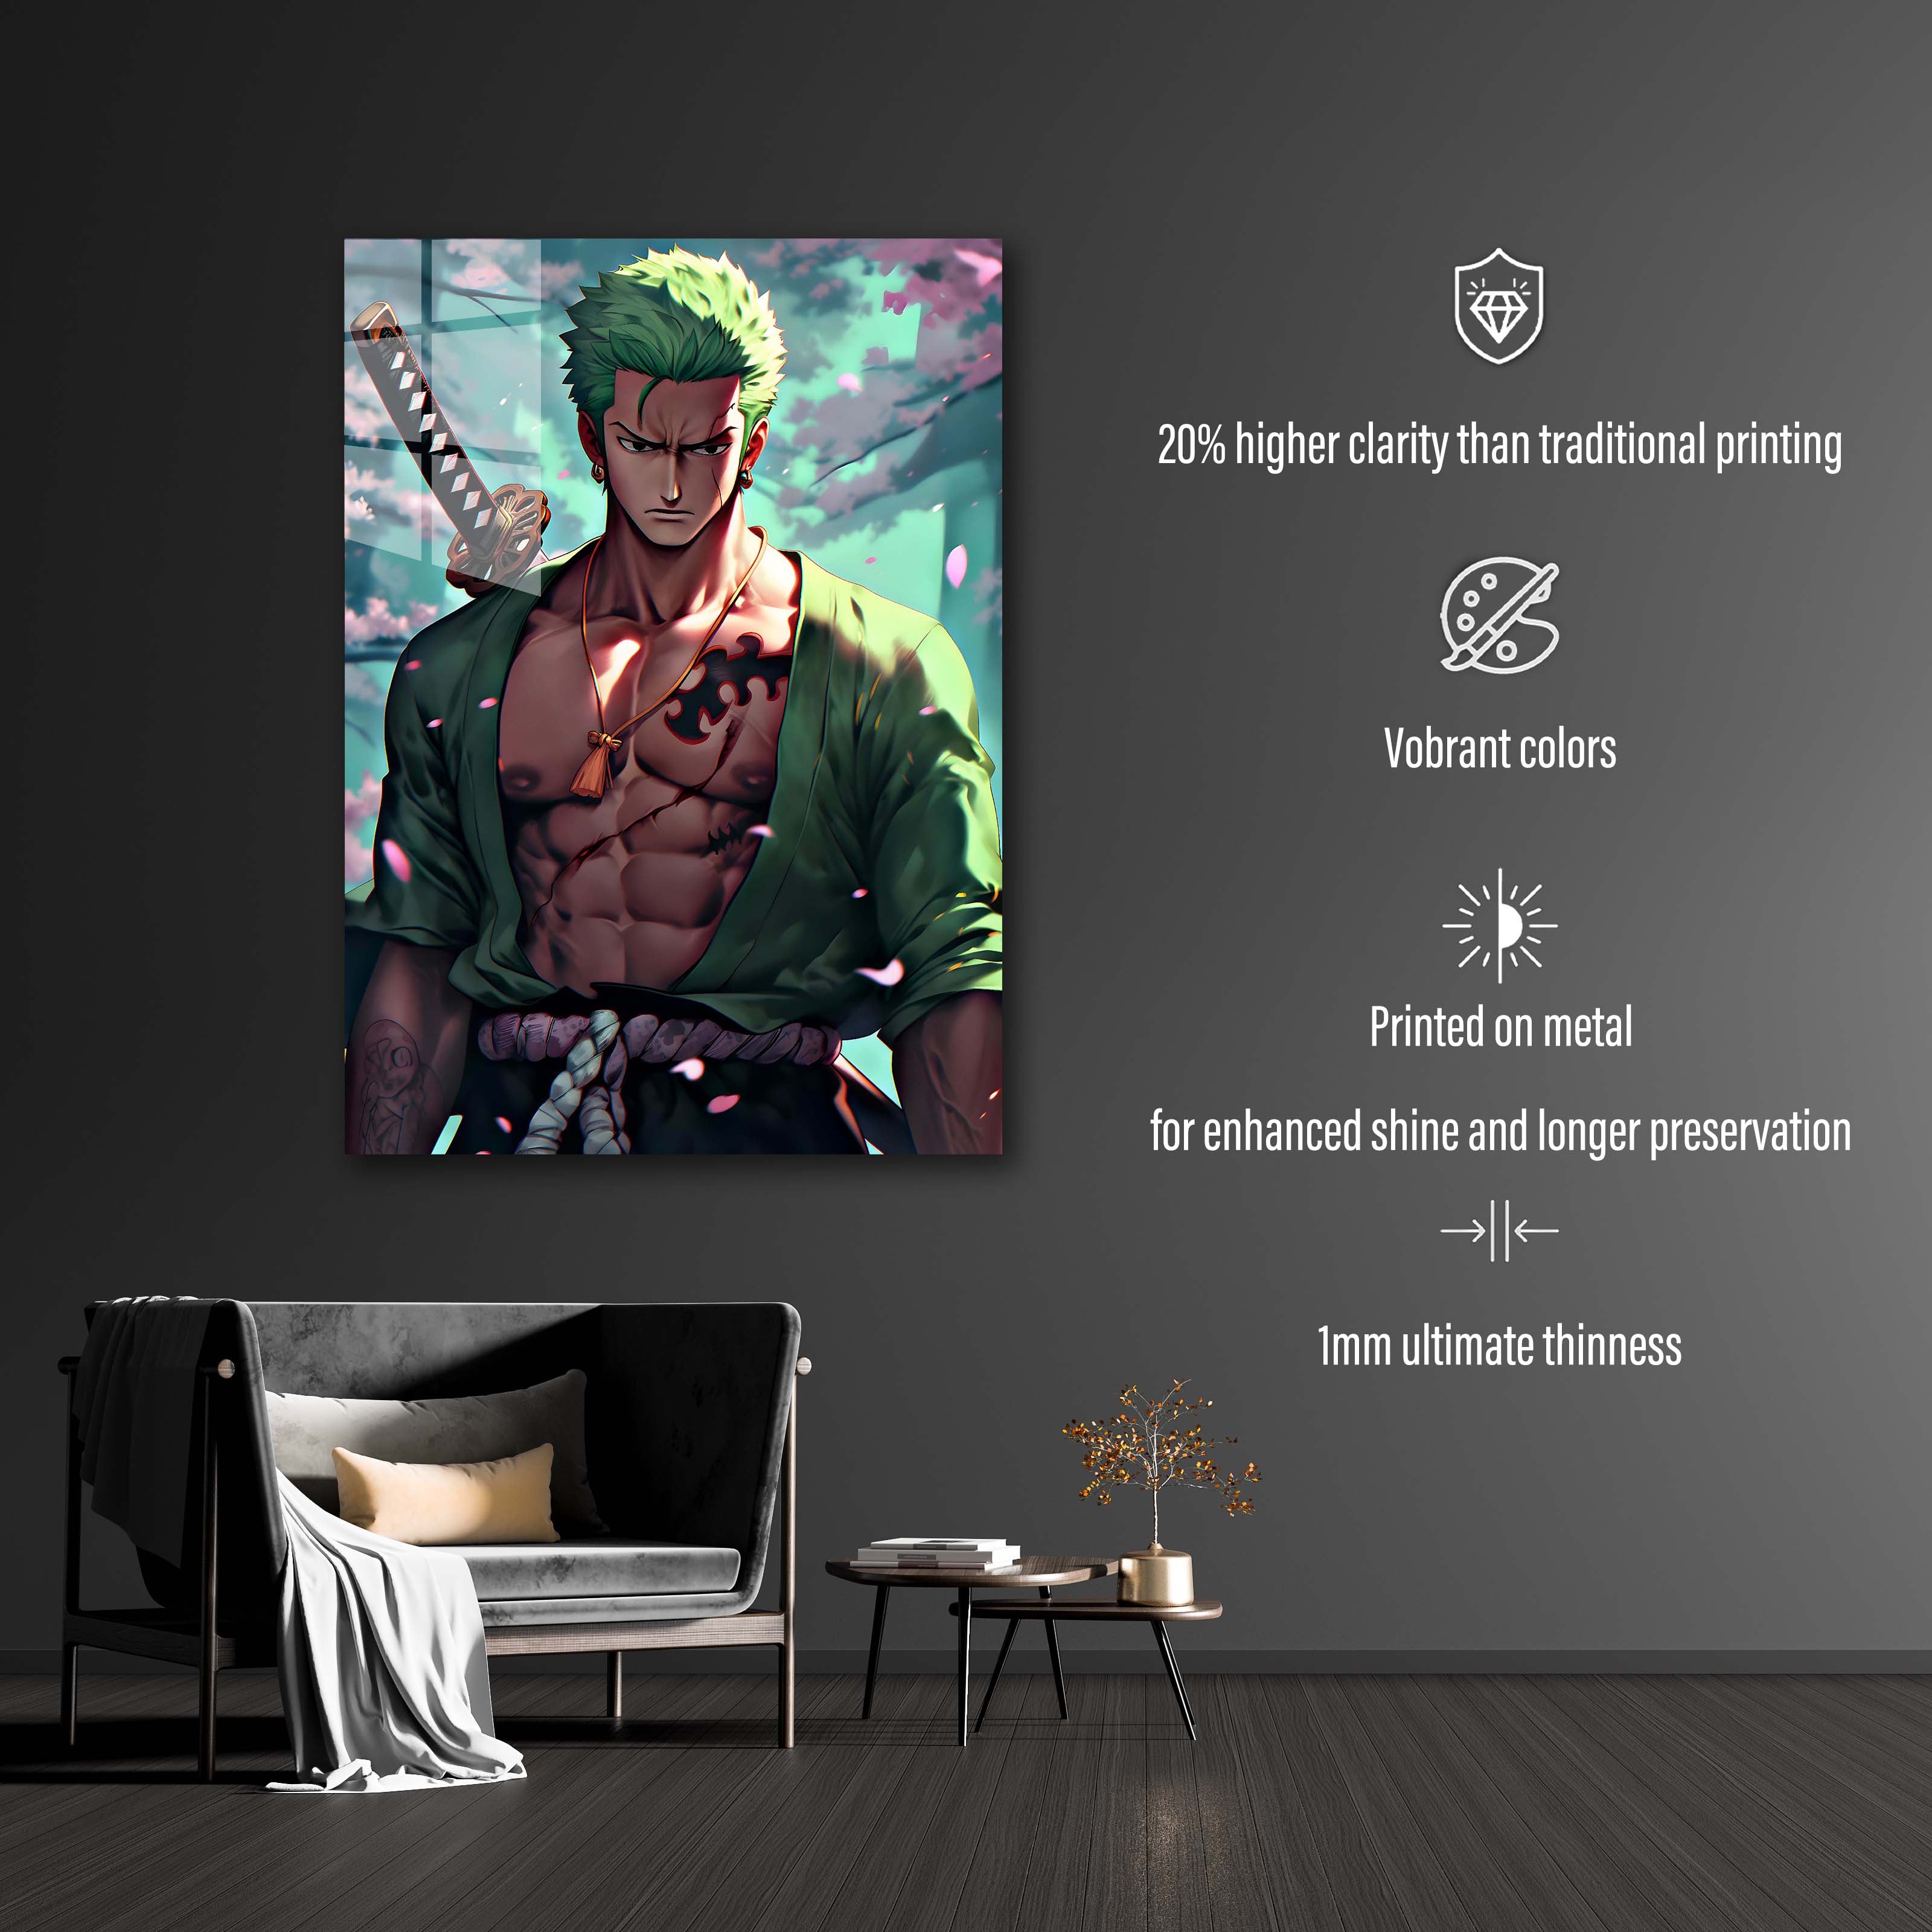 Roronoa Zoro with Katana from One piece-Artwork by @Vid_M@tion